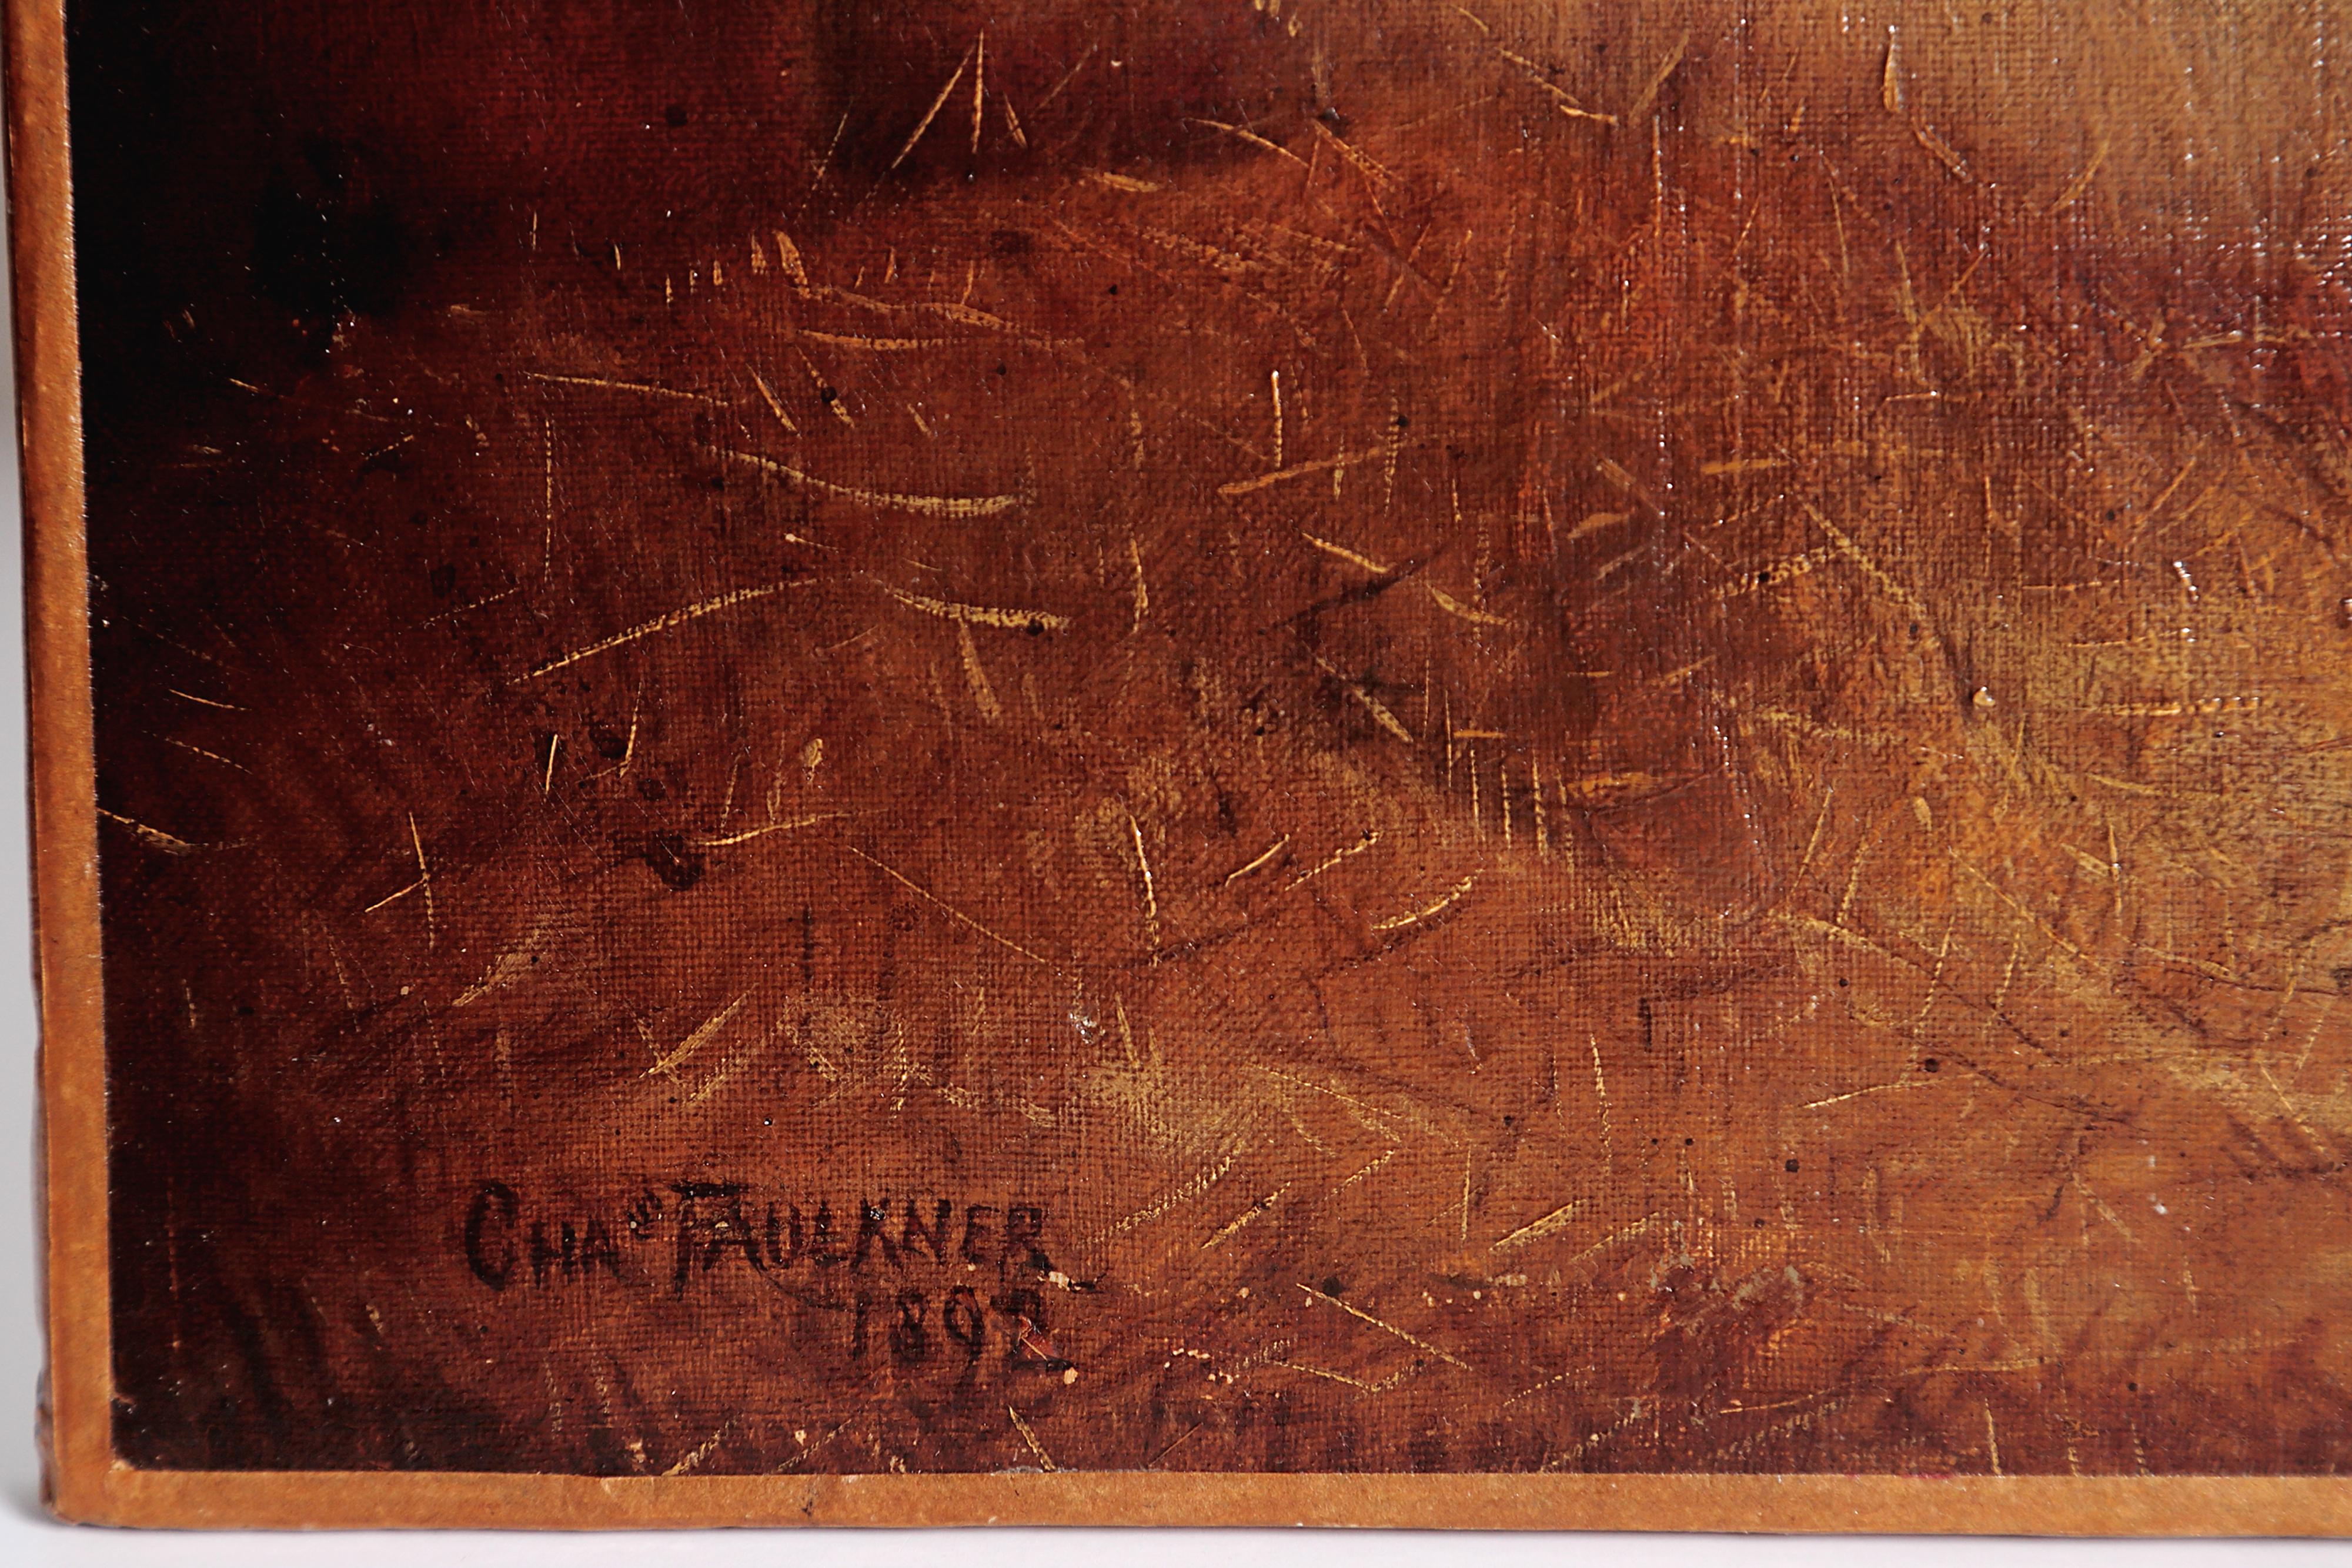 Signed and dated lower left, Chas. Faulkner 1892, marked RATTON bottom center, an English horse portrait depicting horse in stall with hay, re-lined, no frame.